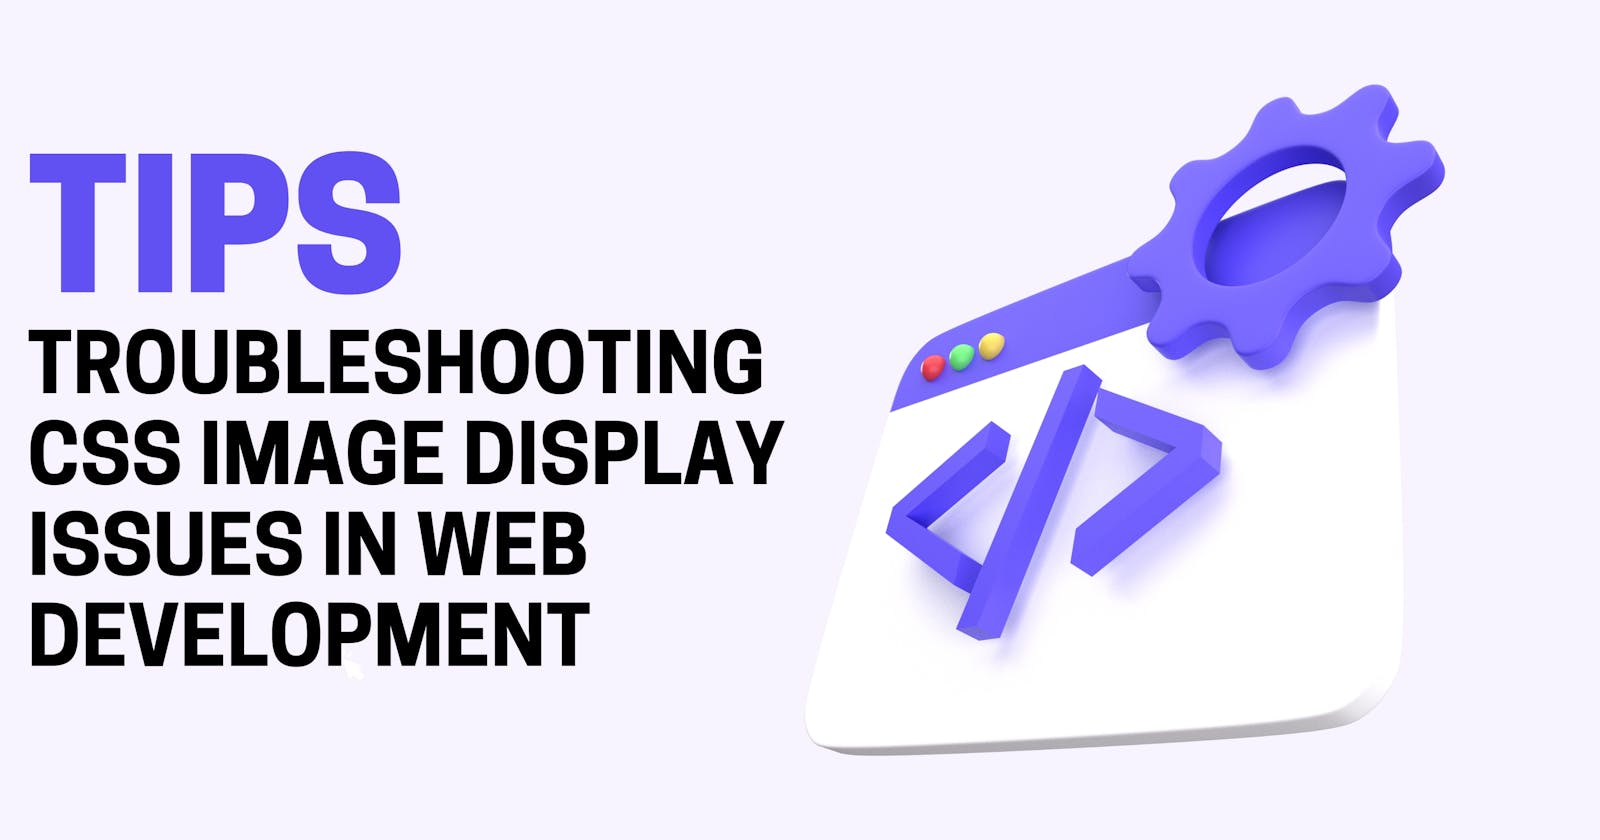 Troubleshooting CSS Image Display Issues in Web Development